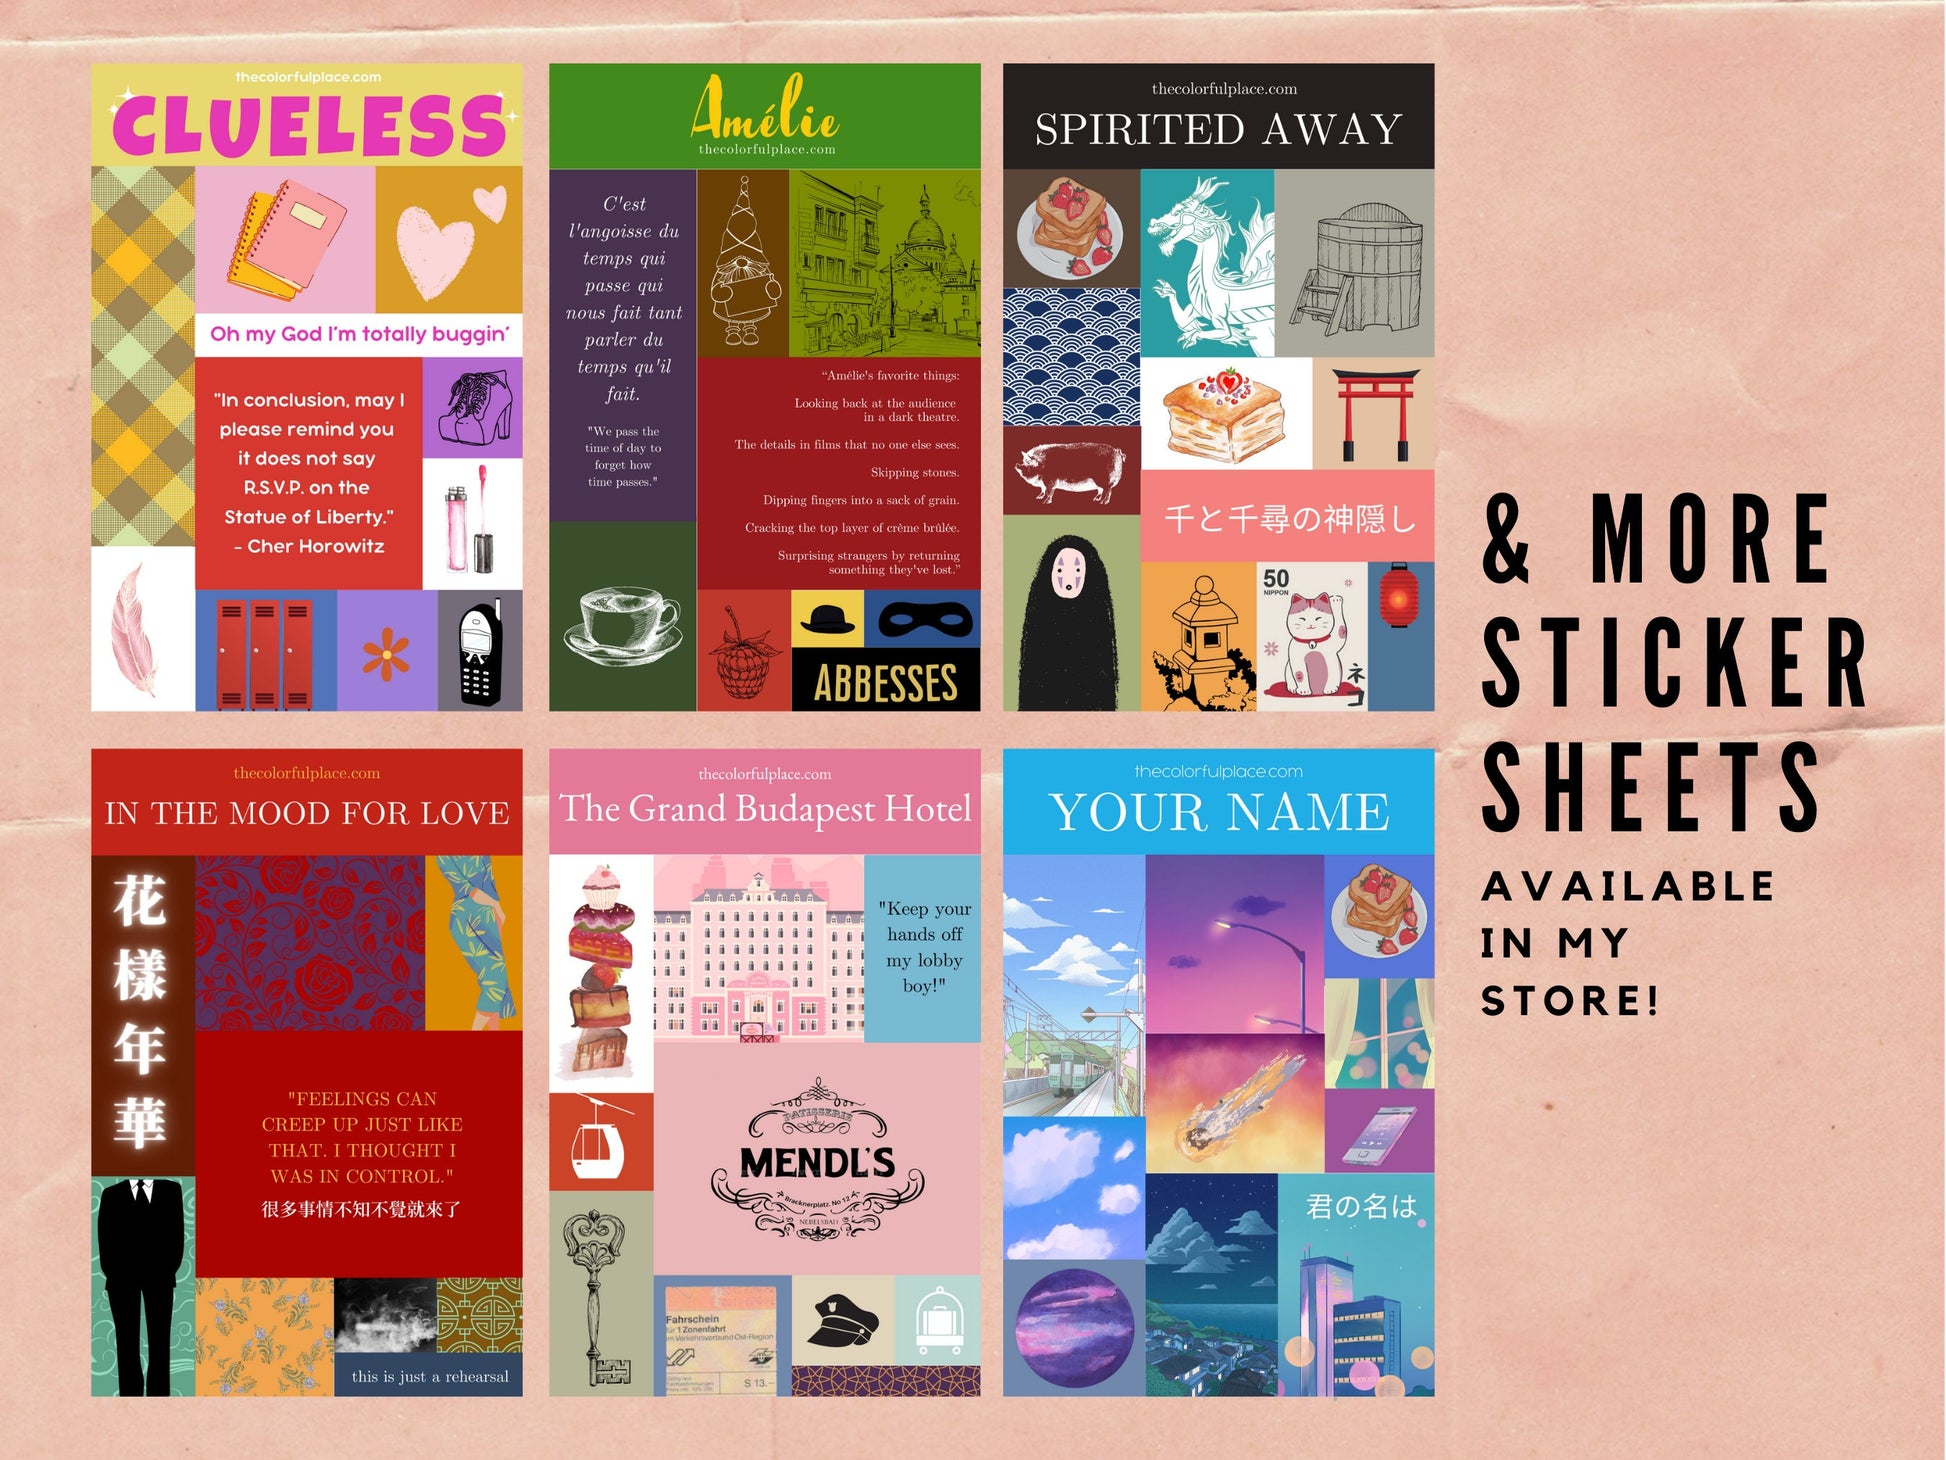 The Grand Budapest Hotel Sheet | Wes Anderson | Film Lover Gifts